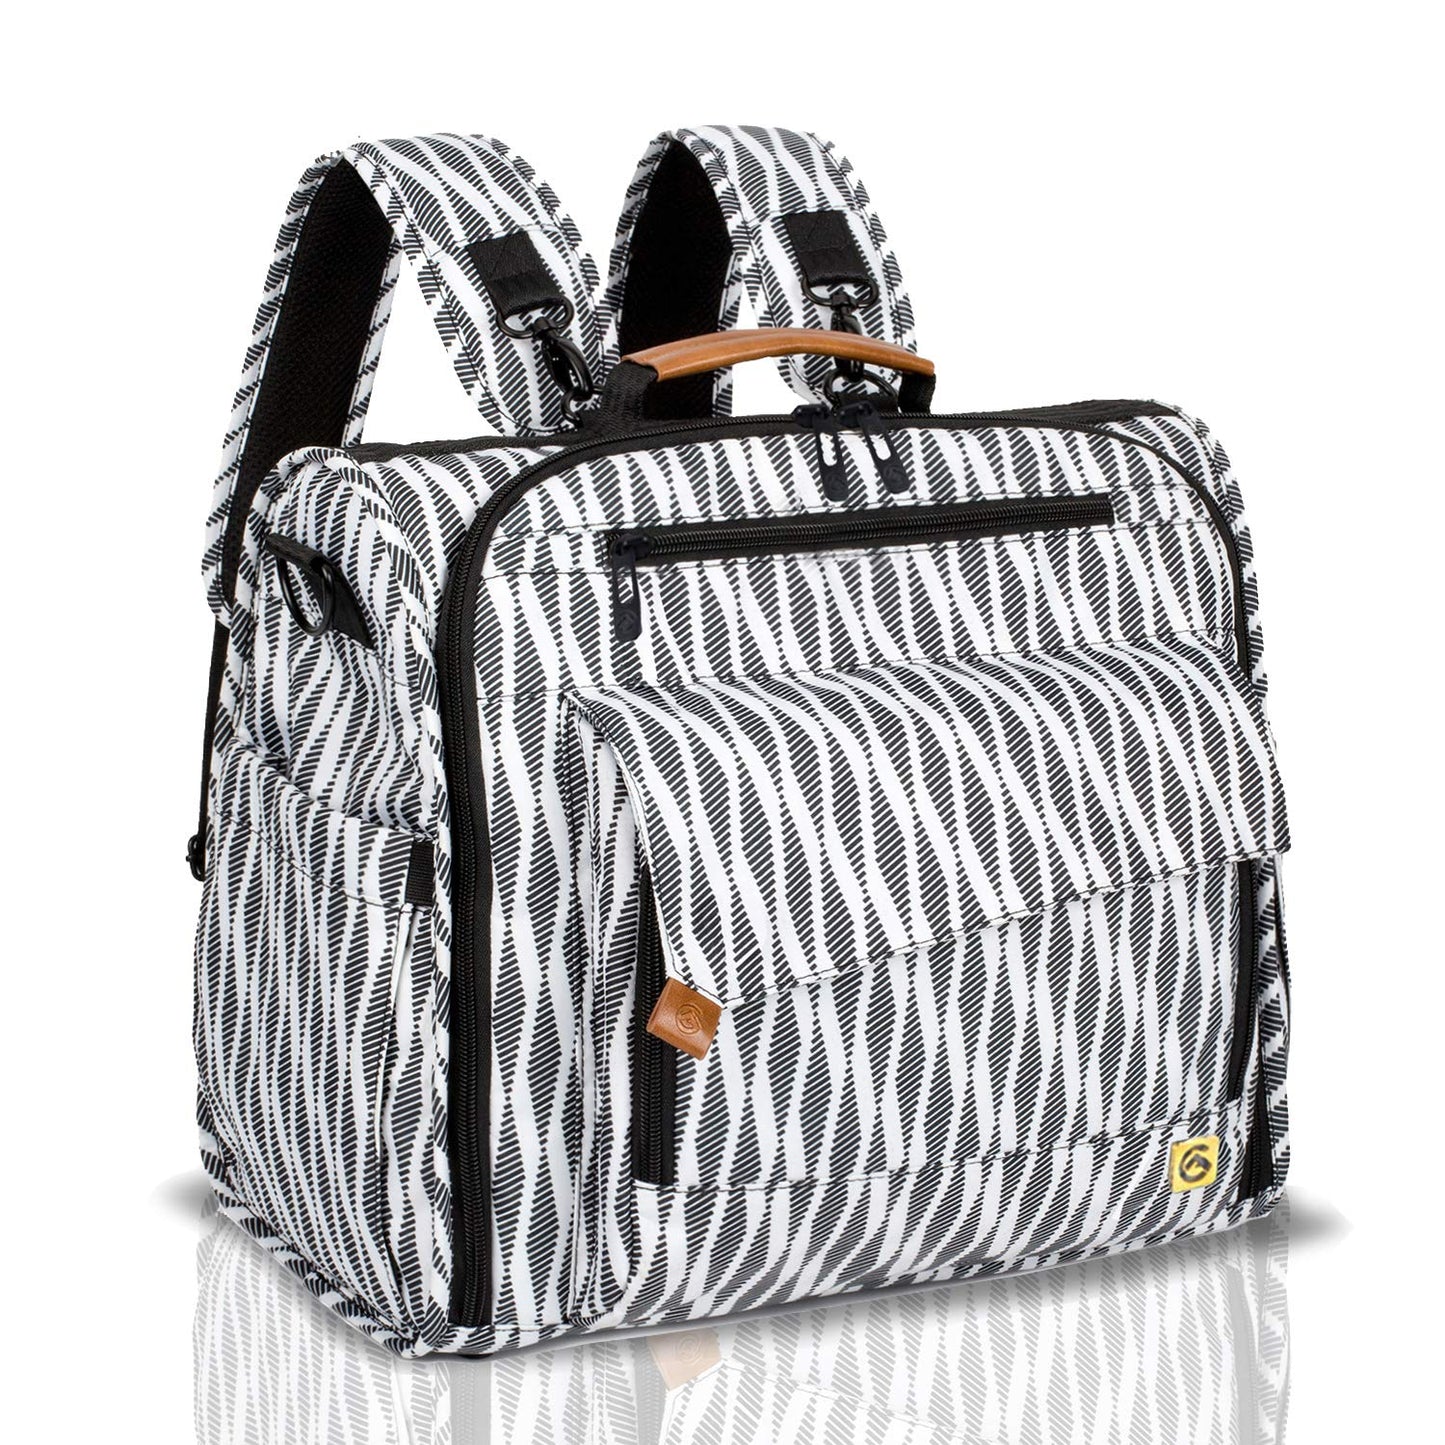 ALLCAMP Zebra Diaper Bag/Multi-Functional Convertible Diaper Backpack Messenger Bag,Large Capacity, Waterproof and Stylish - (For 6 piece(s))